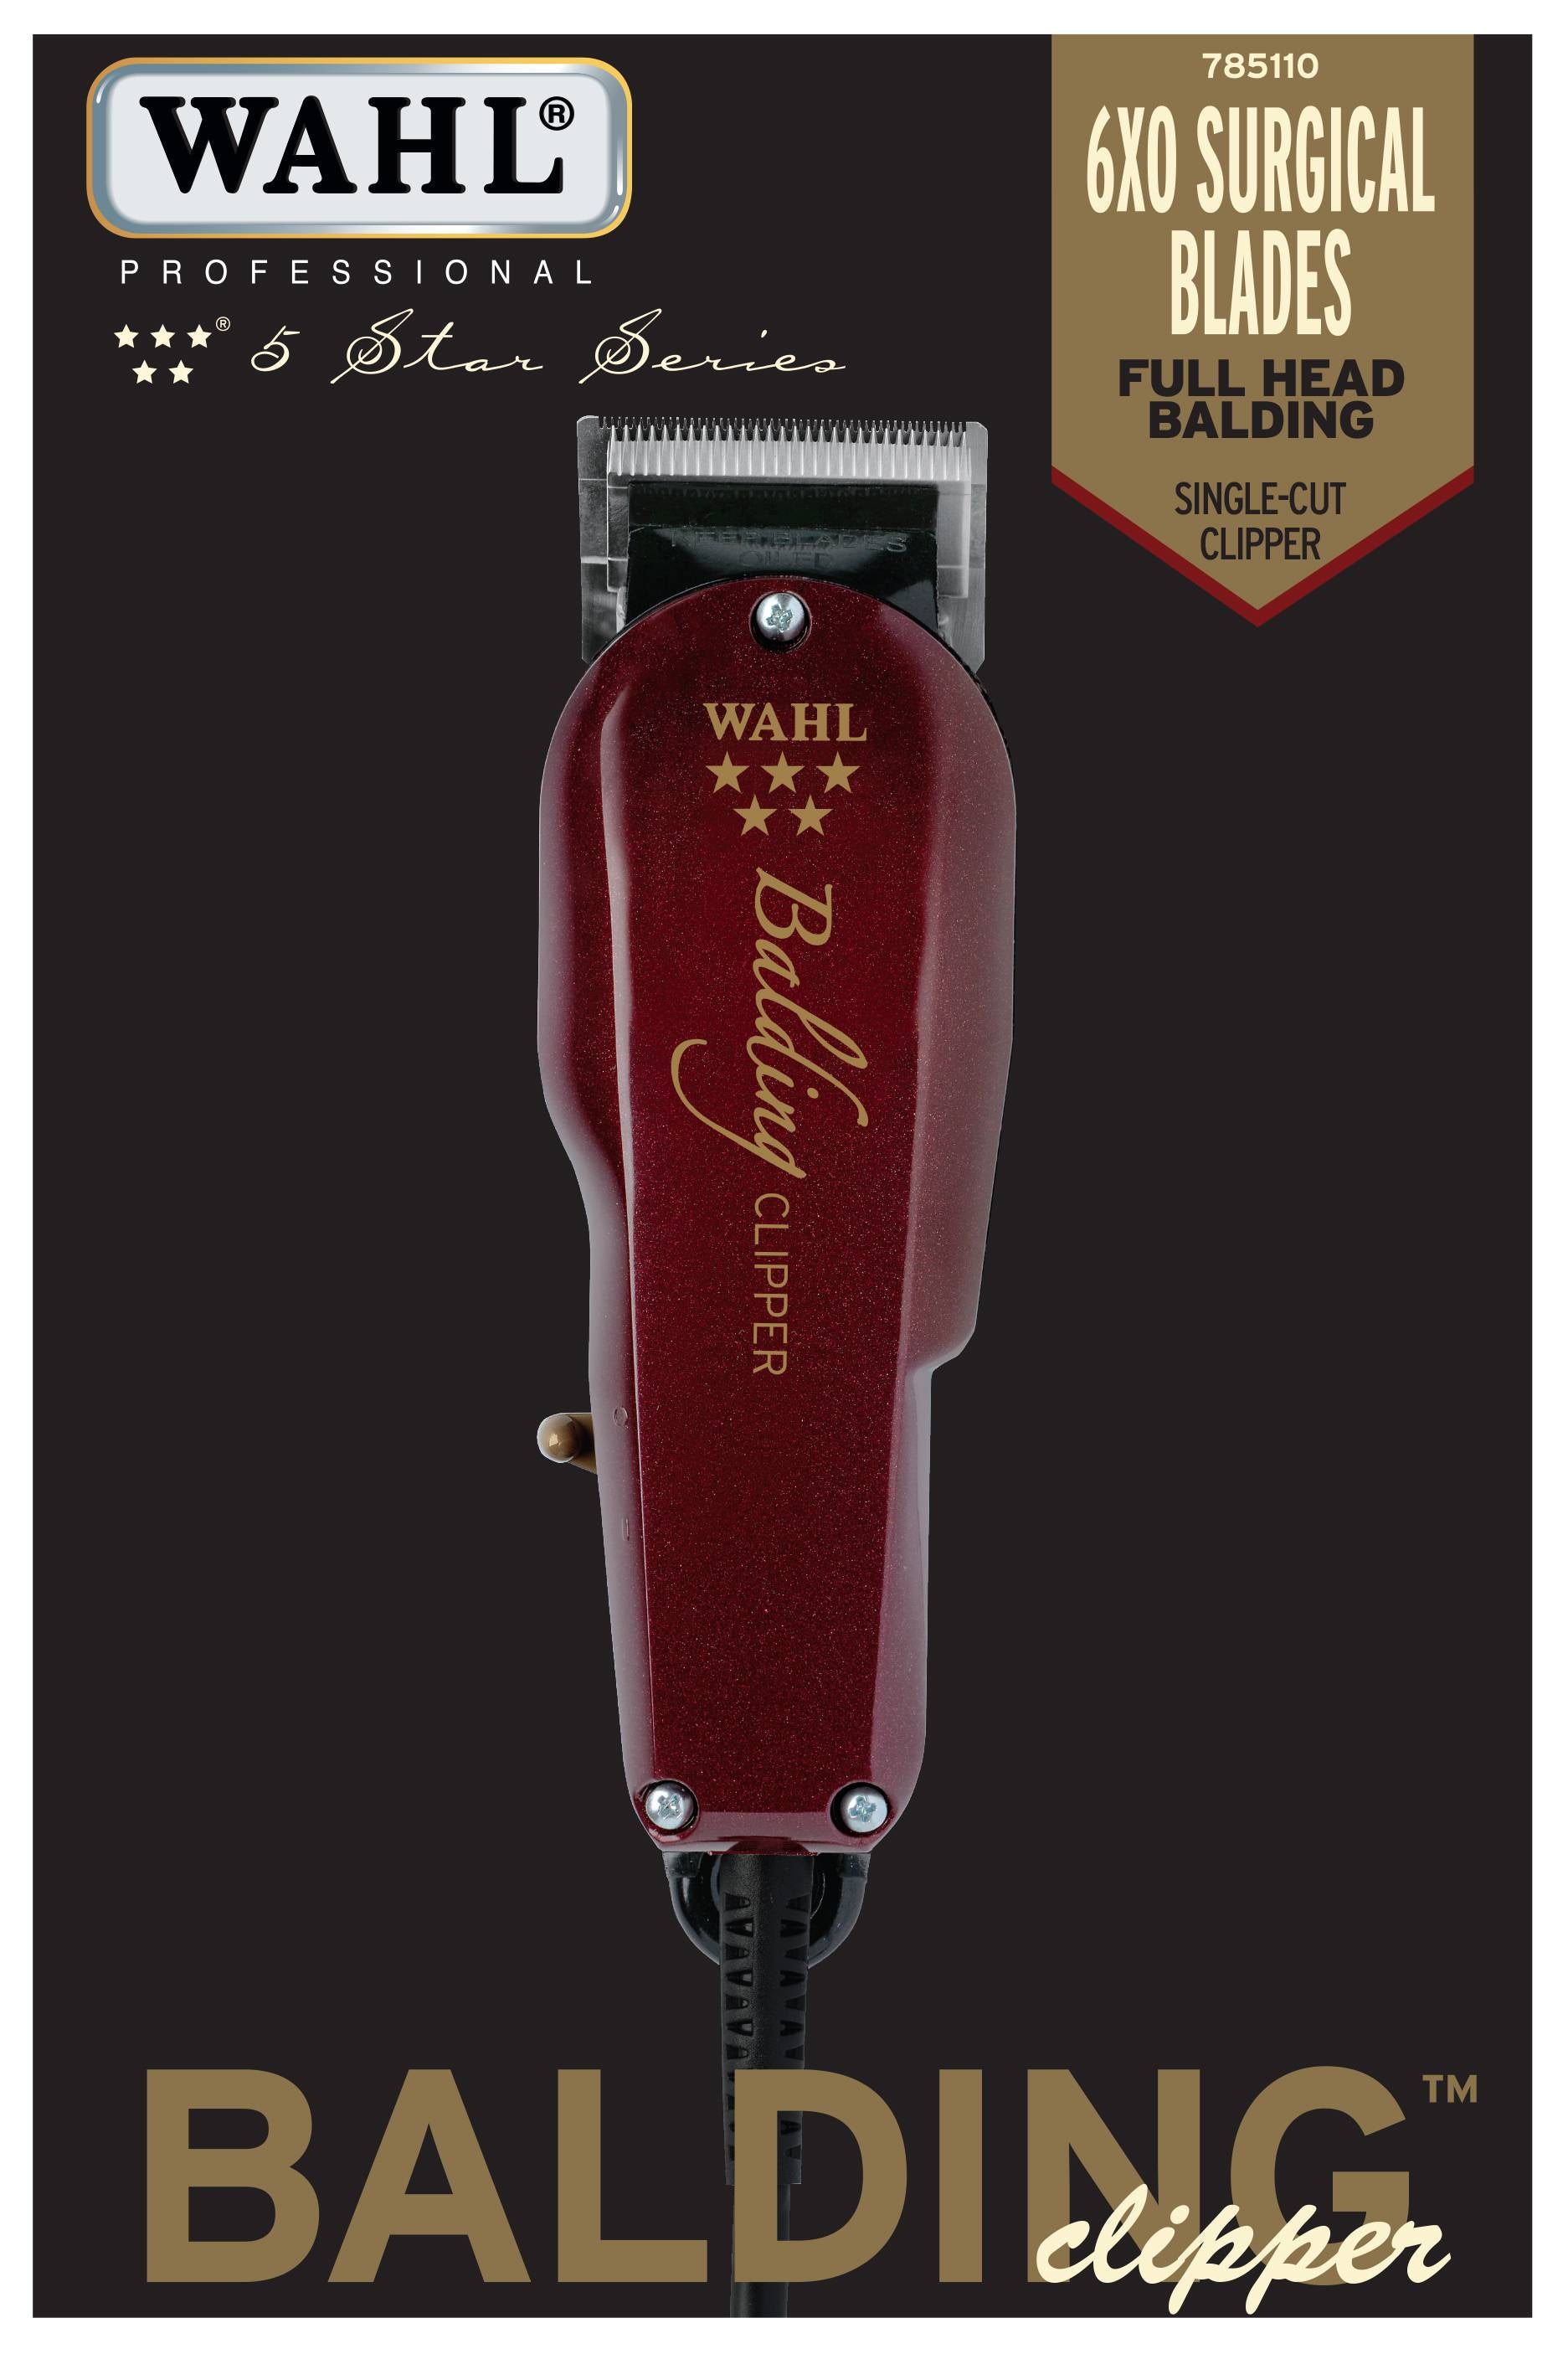 Wahl 5 Star Balding Clipper 6X0 Surgical Blades Professional   56164